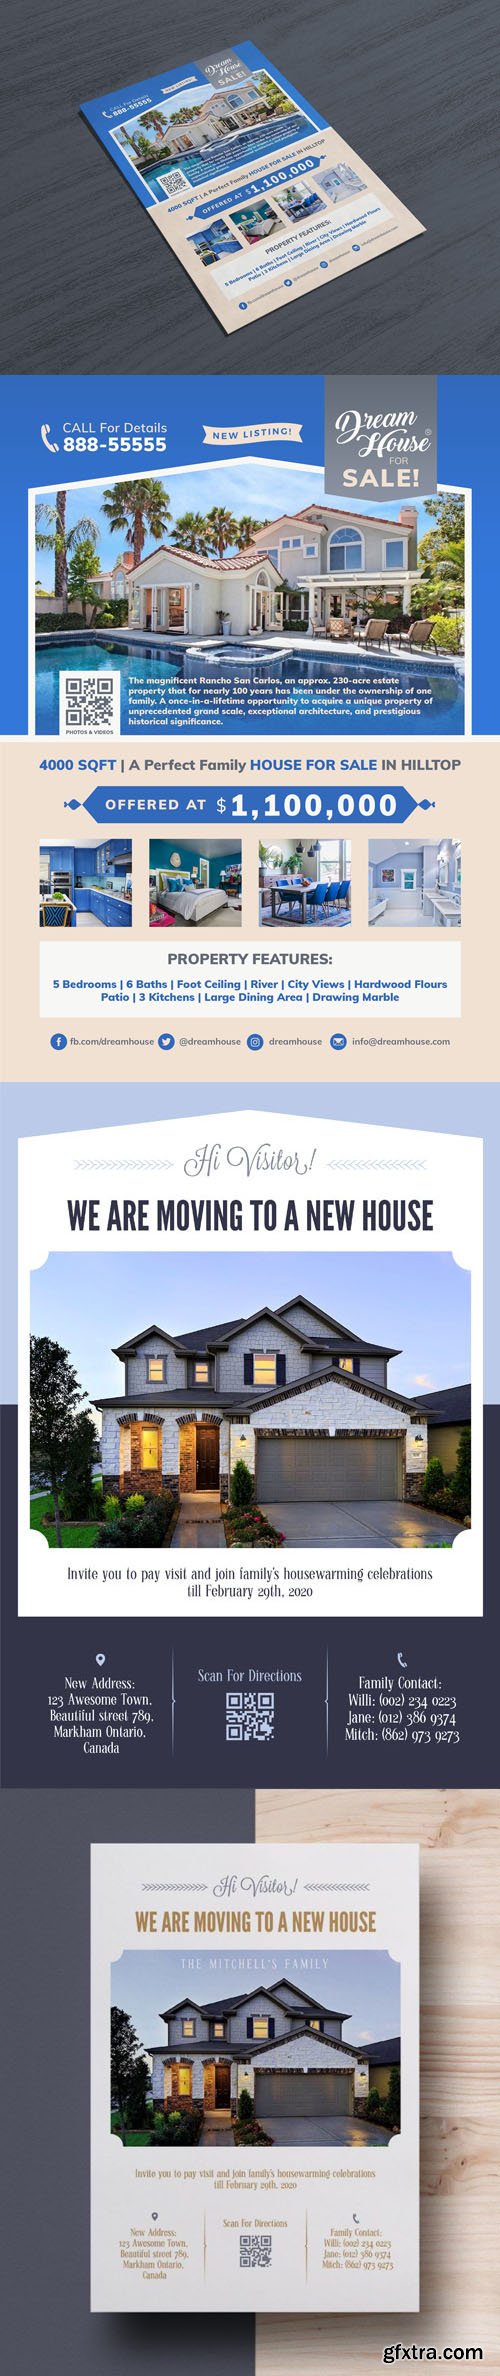 Real Estate - House for Sale & Moving Announcement Flyers Templates